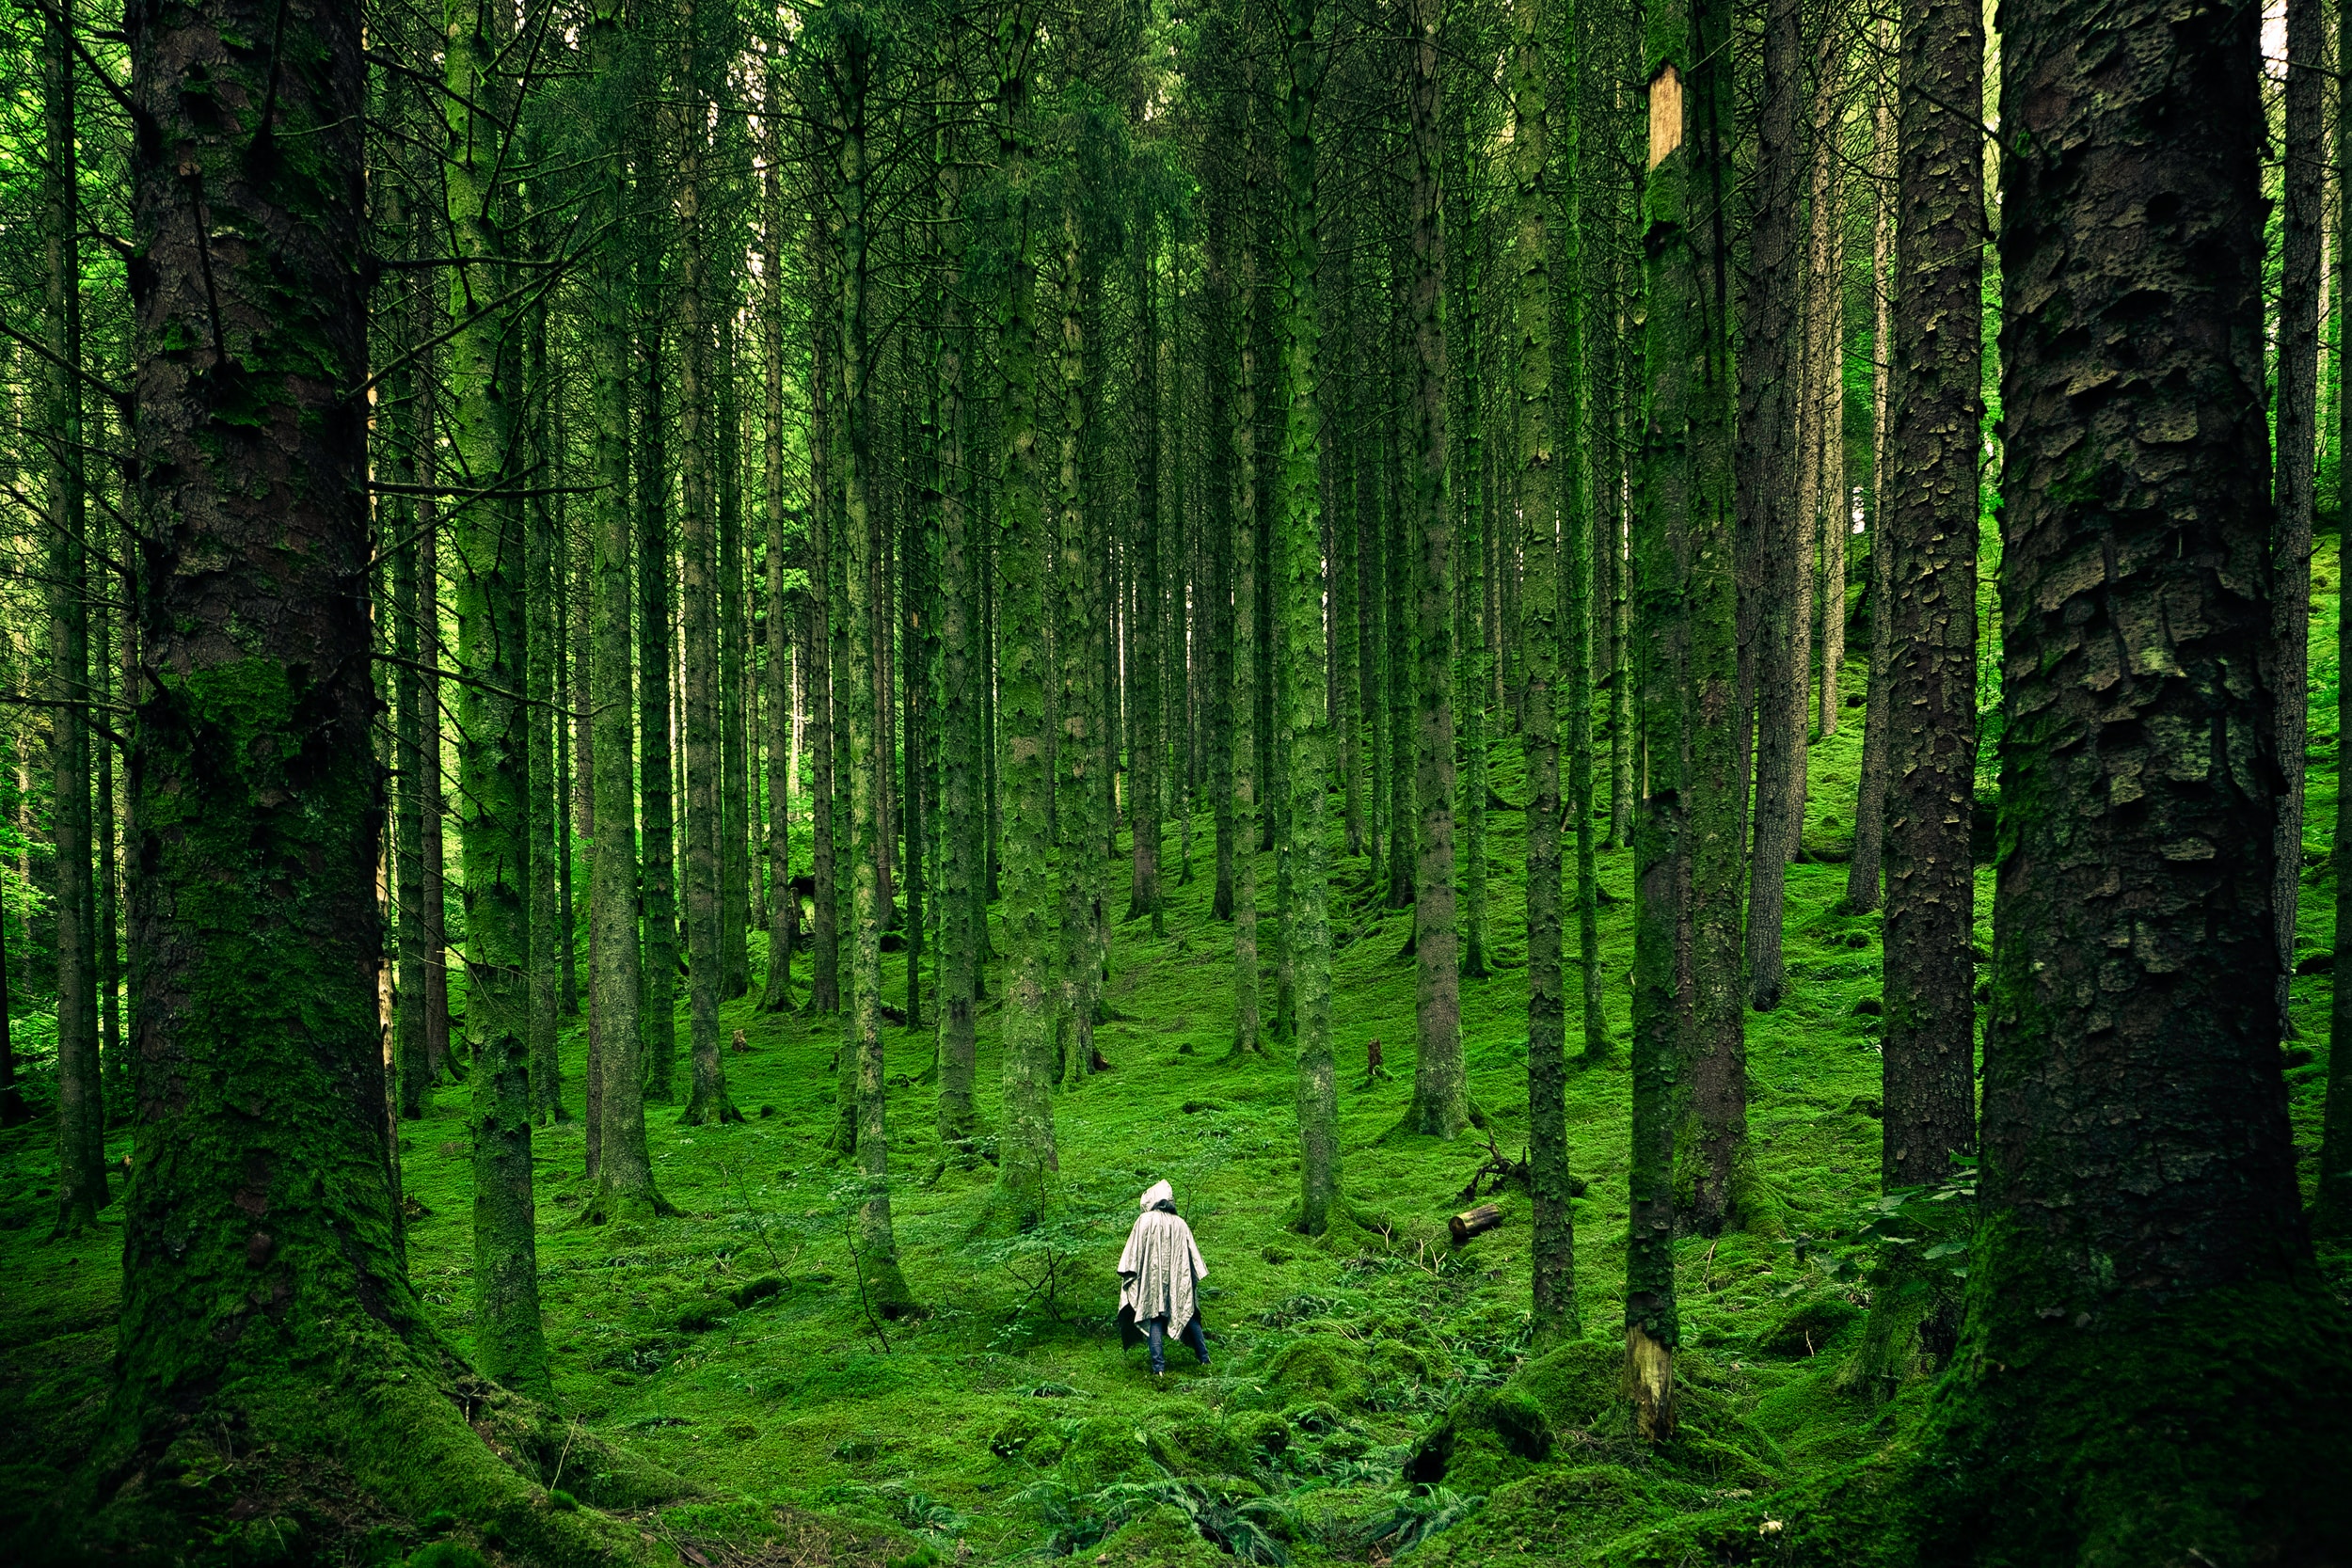 Japanese culture and mythology contributes to the reputation of the Aokigahara Forest. 
pictured: A flourishing green Japanese forest with a single person wearing a white poncho walking through